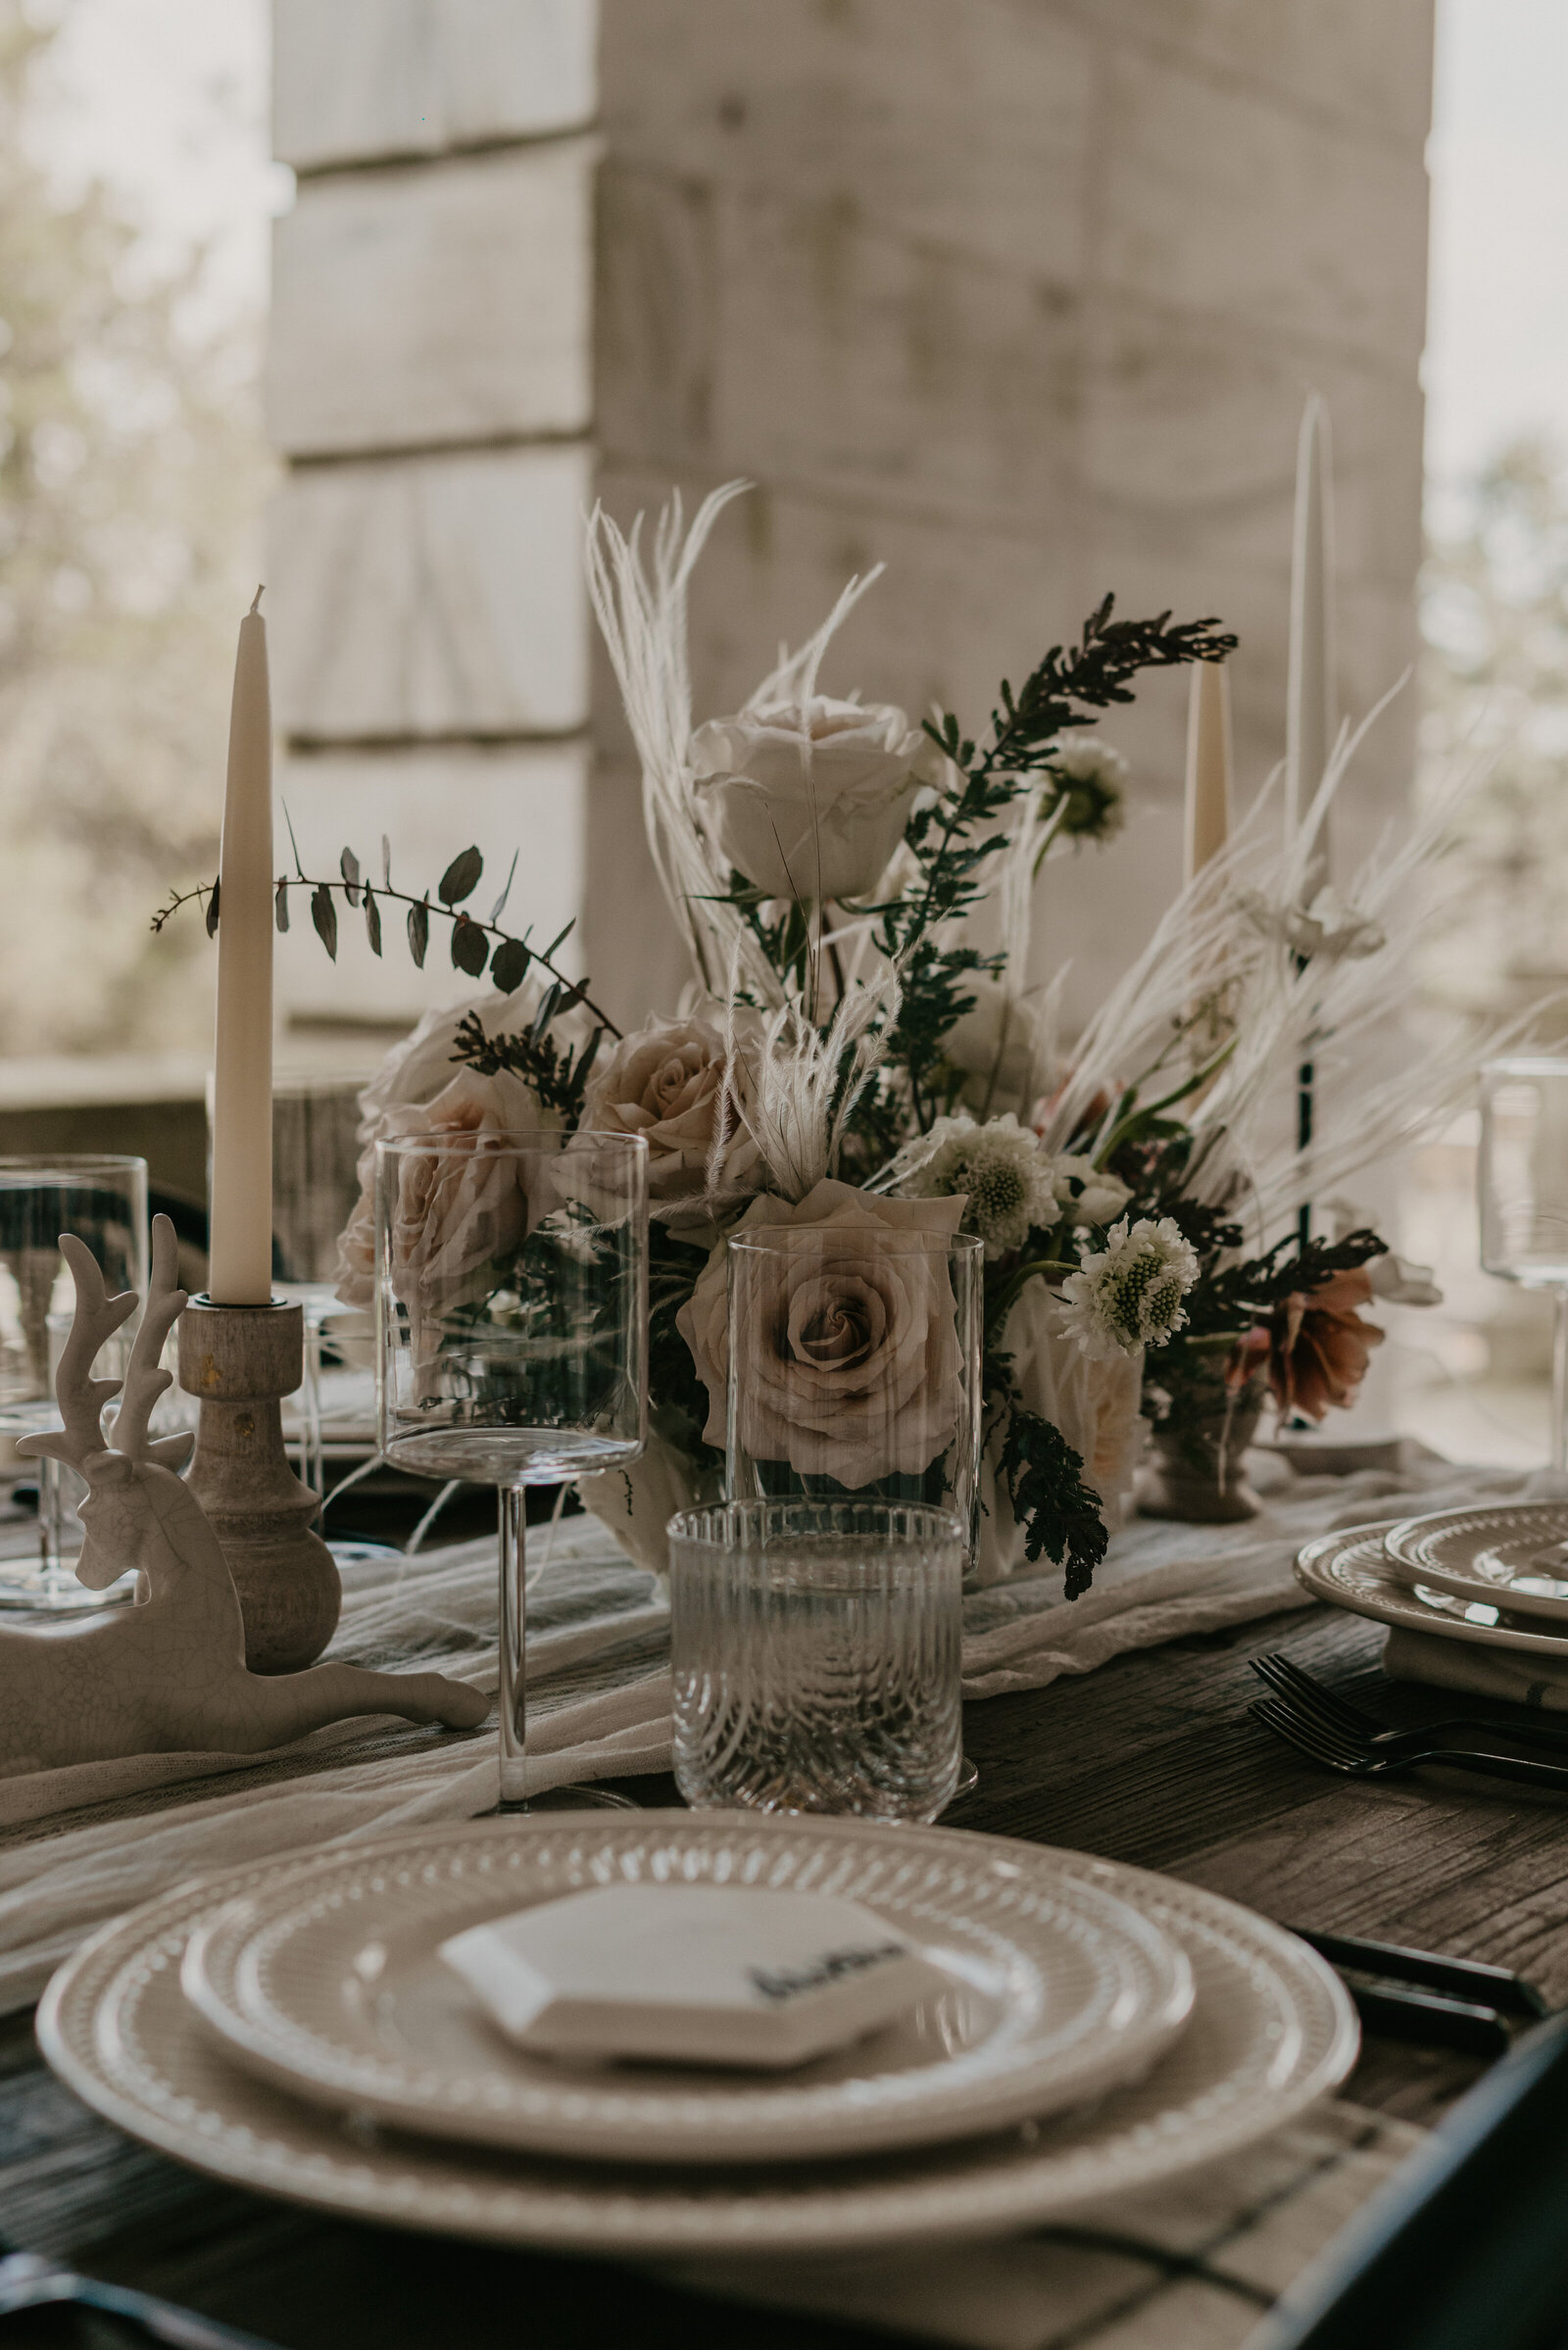 Classic and timeless sweetheart table at wedding.